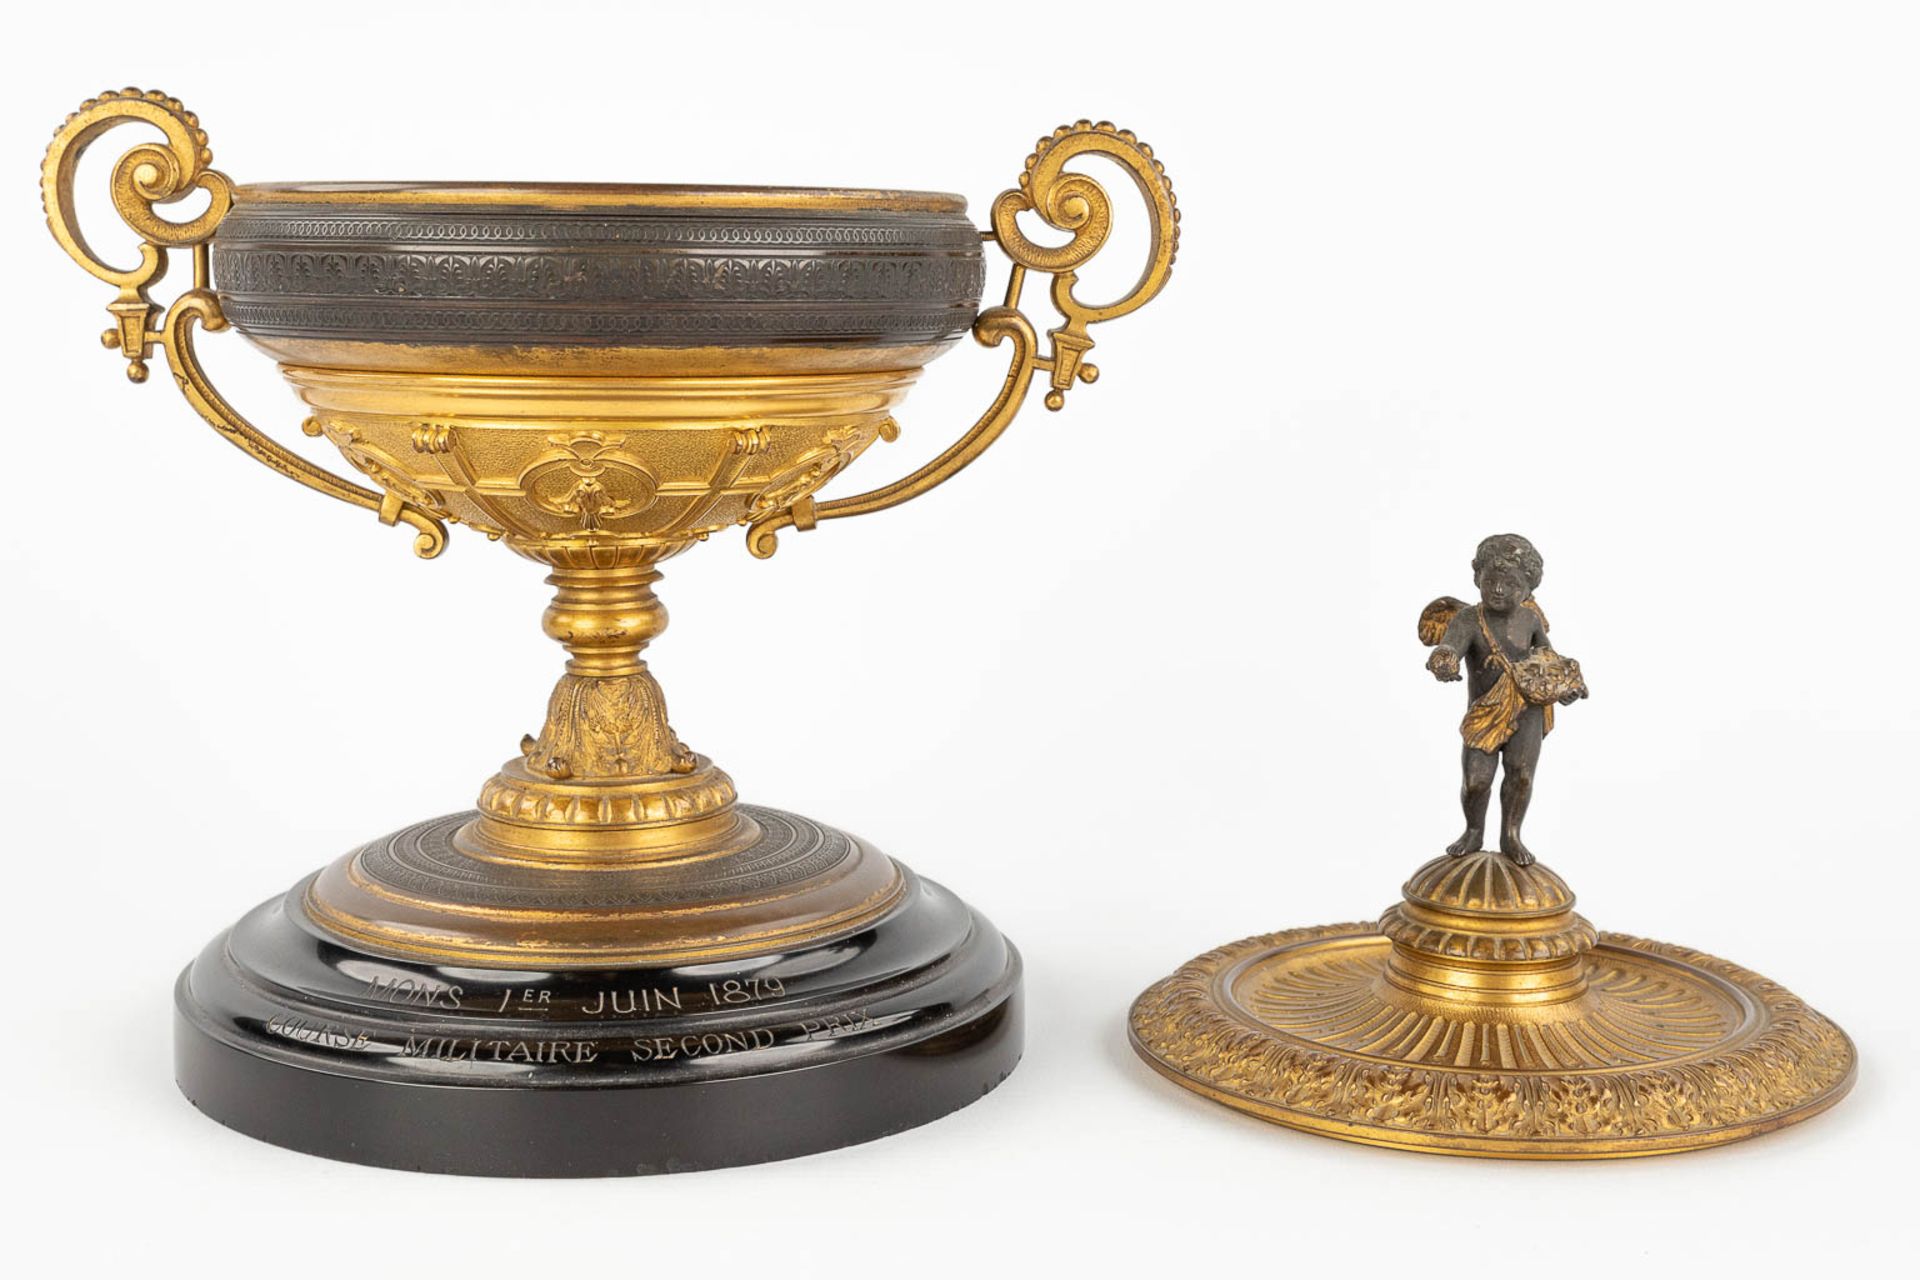 An antique trophy, made of gilt and patinated bronze. 19th C. (L: 16 x W: 22 x H: 27 cm) - Image 7 of 14